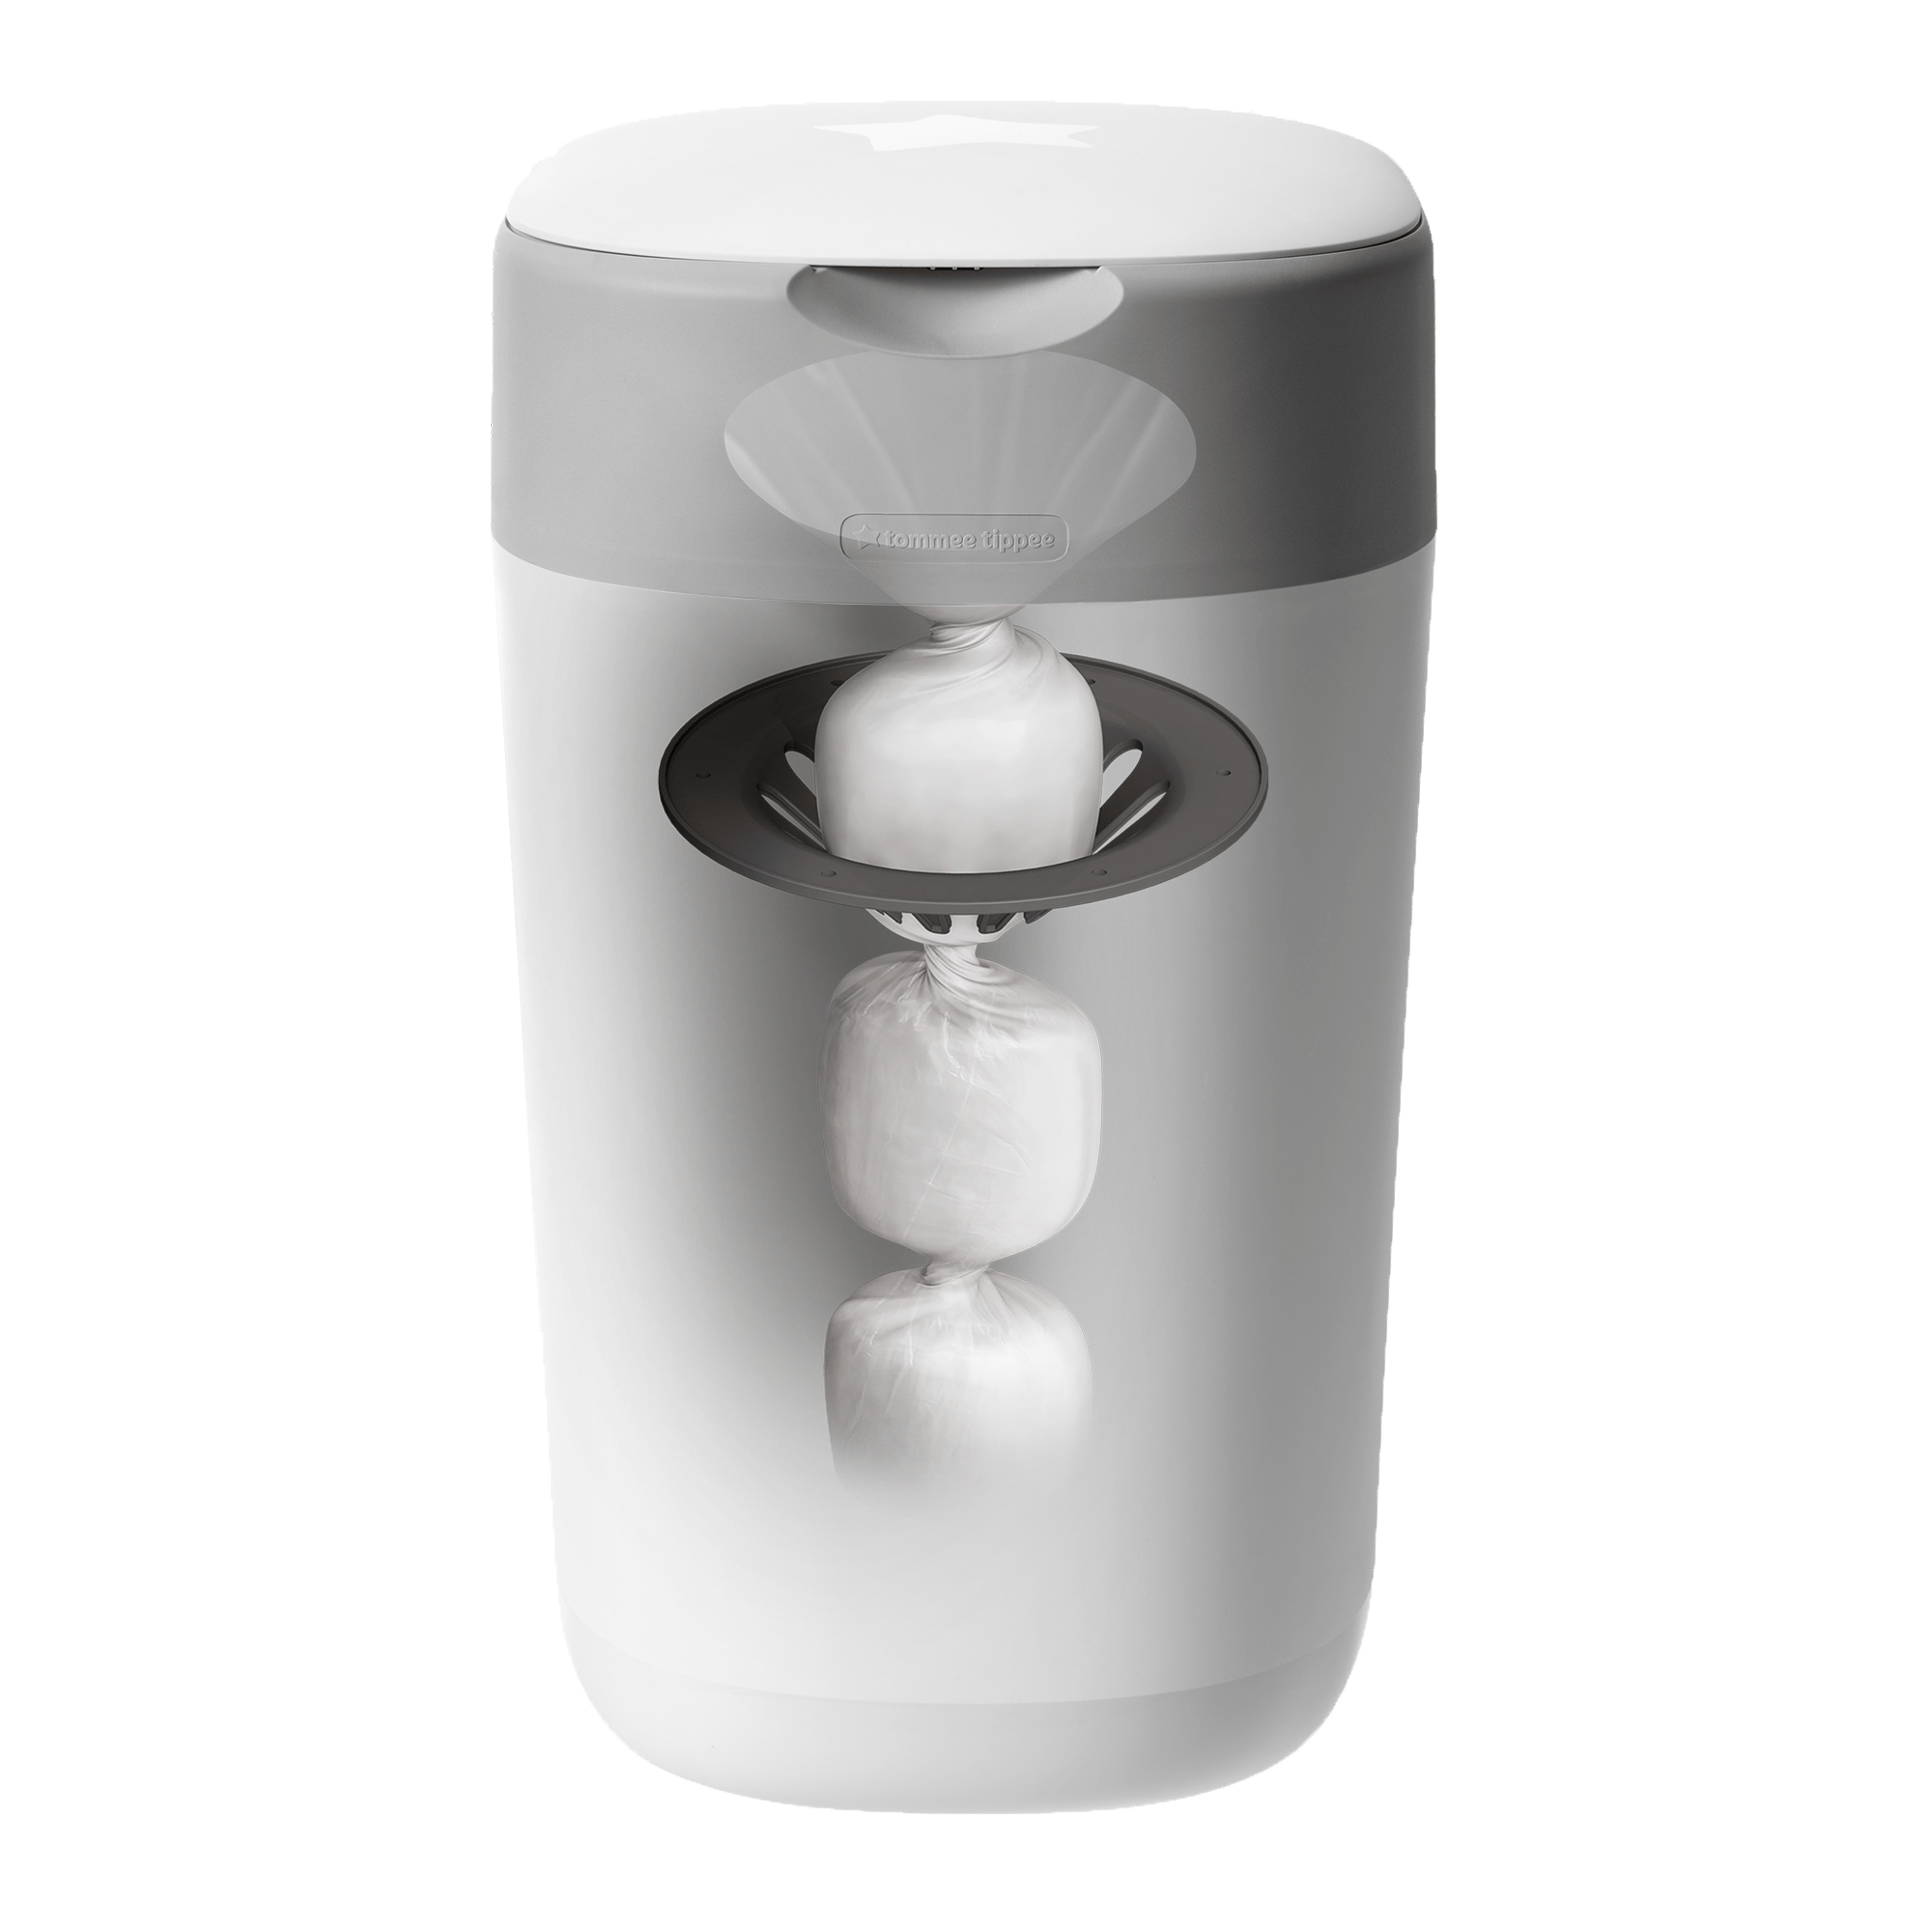 Lixeira Tommee Tippee Twist And Click - 85101501